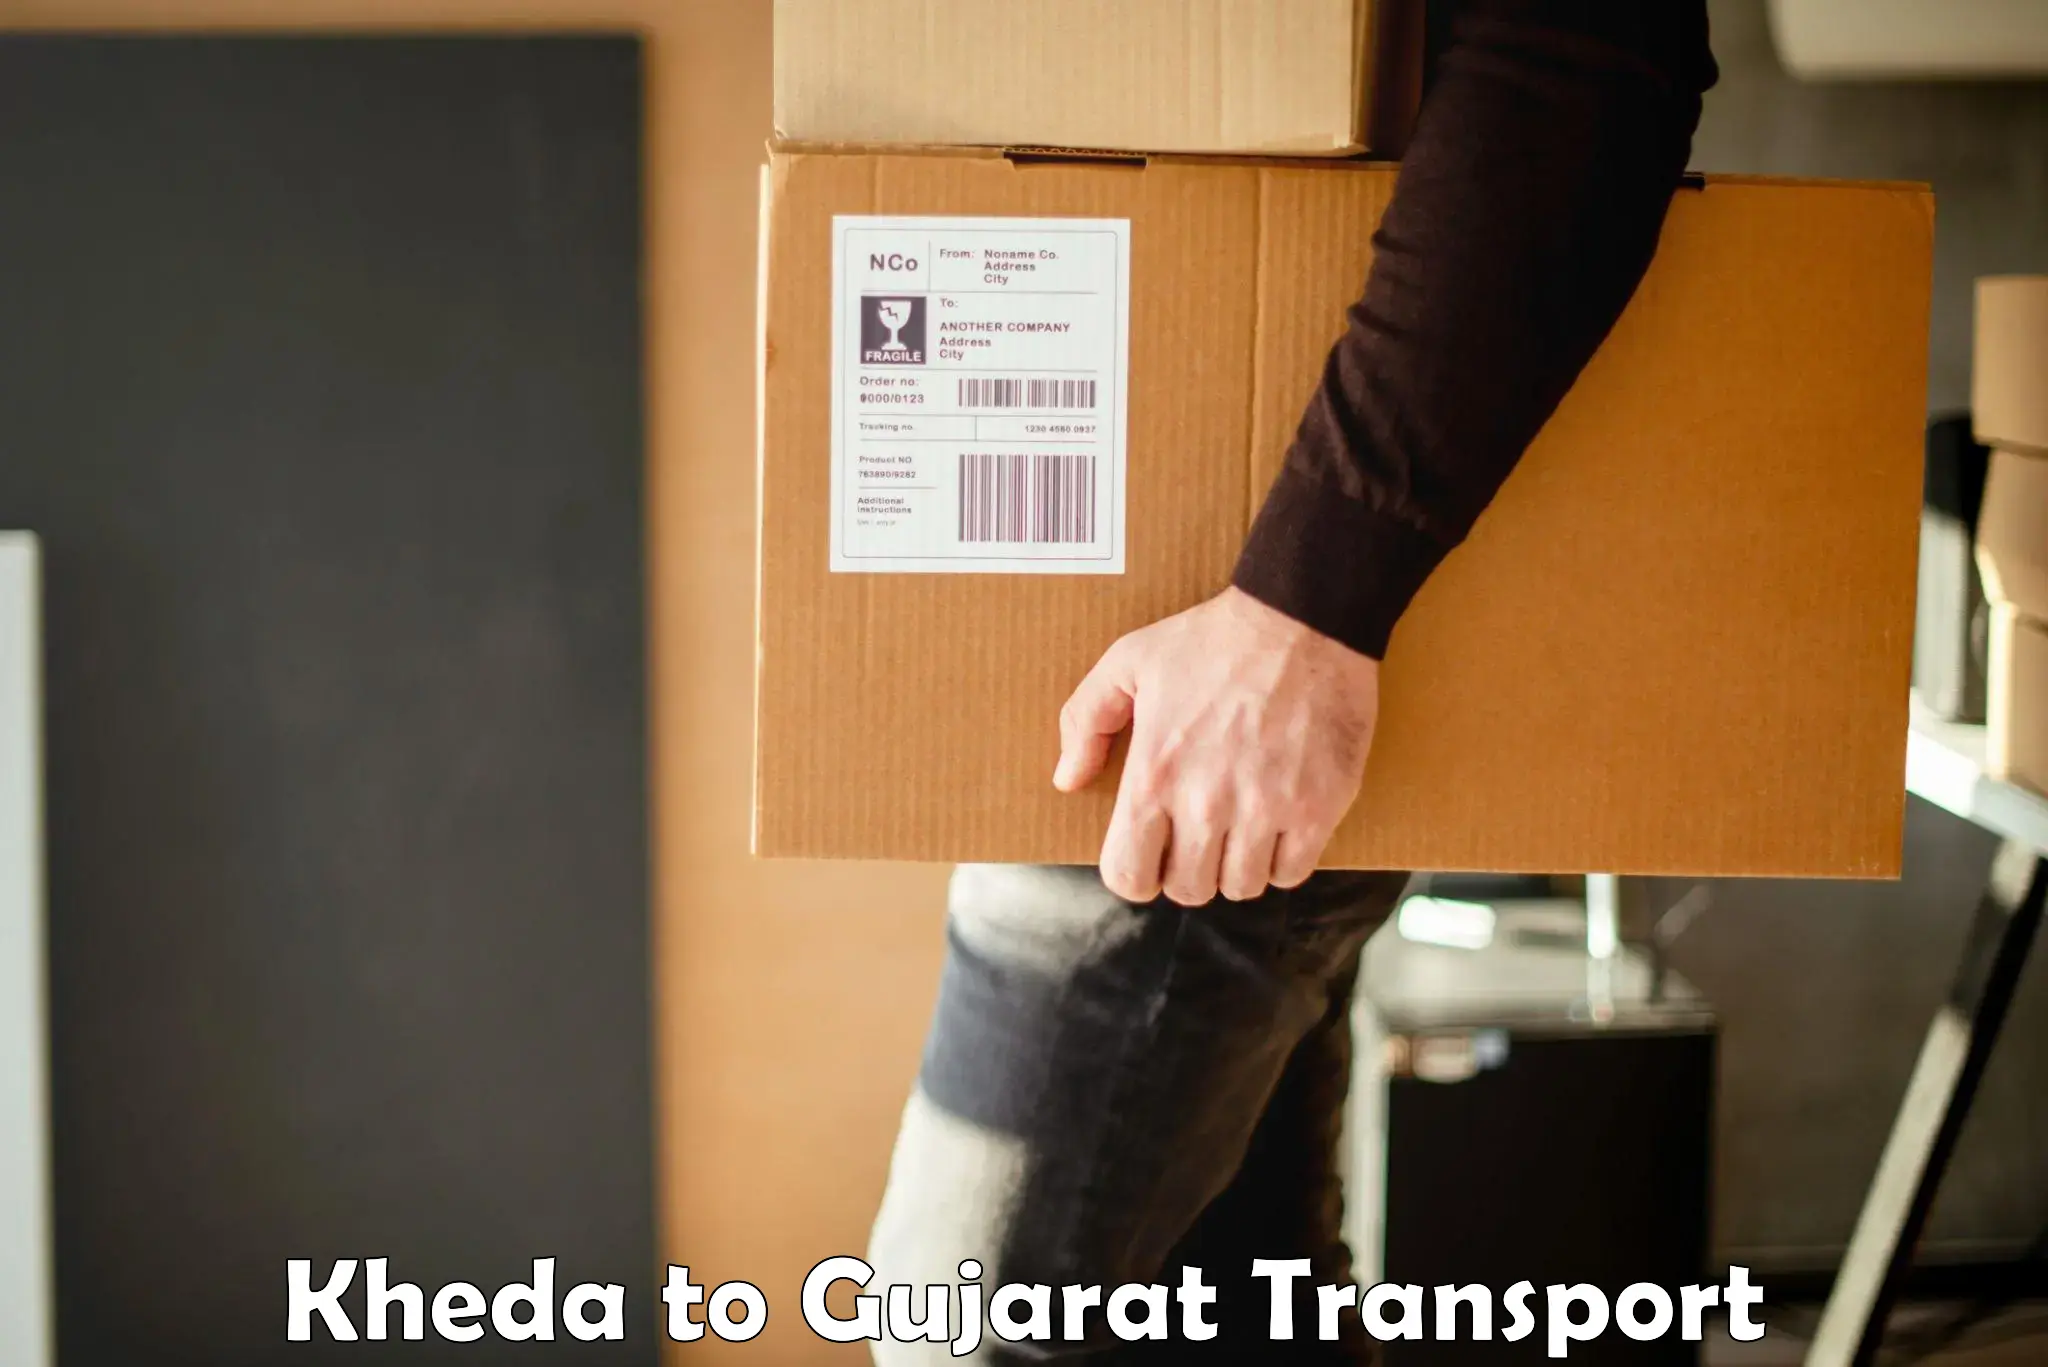 Two wheeler parcel service Kheda to Ahmedabad